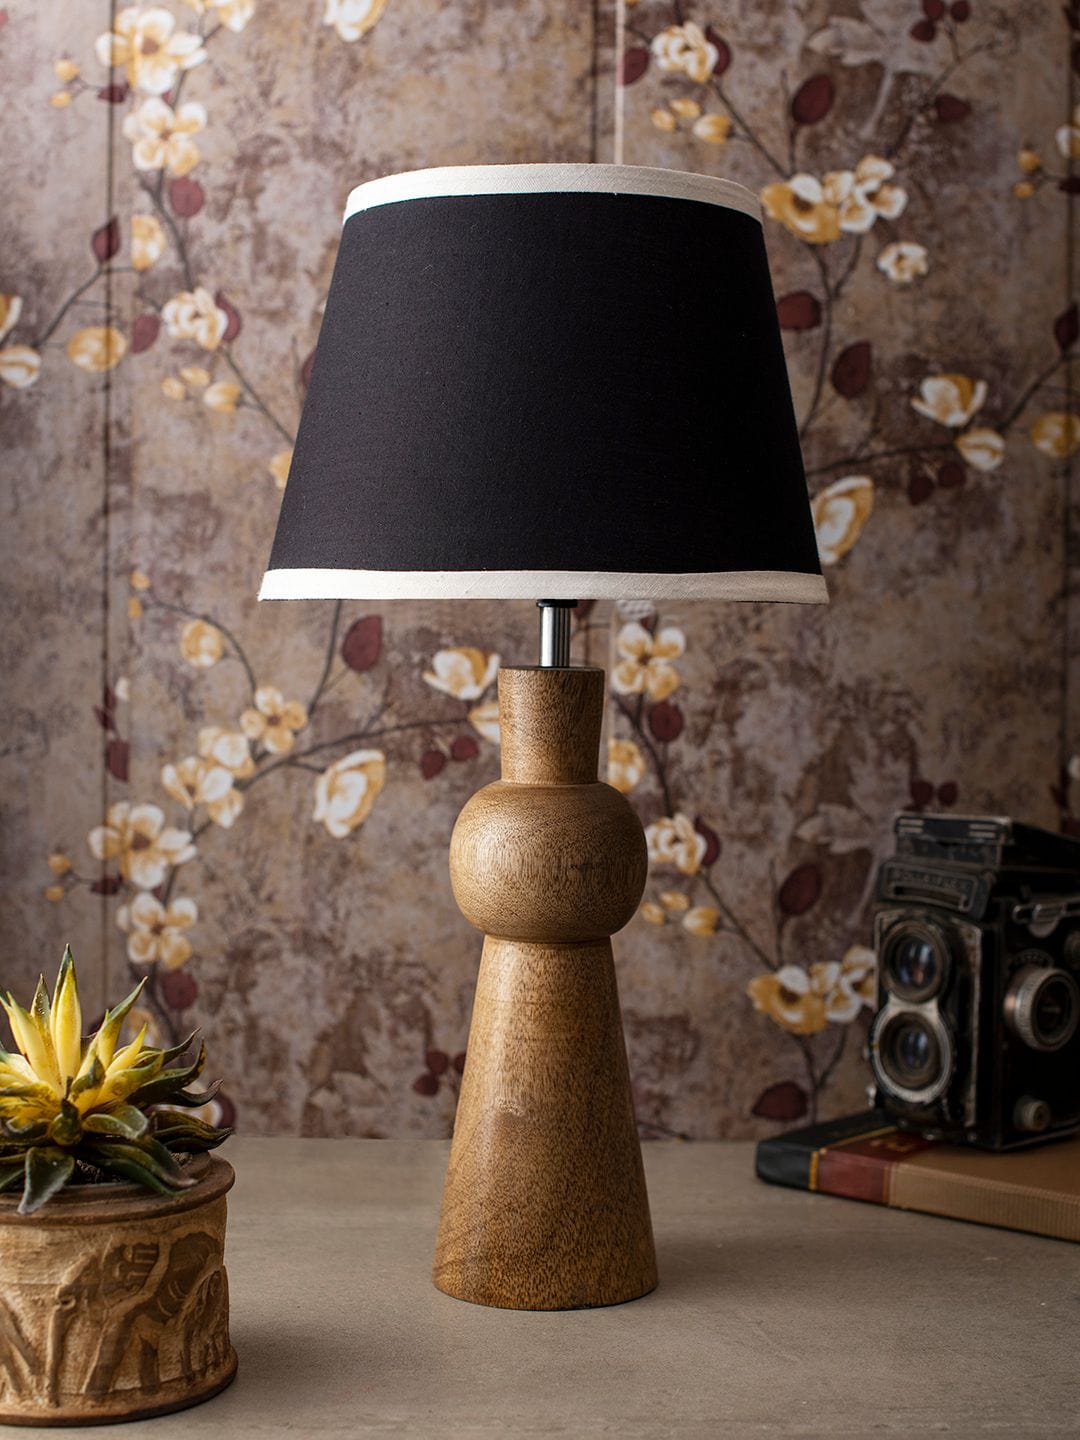 Wooden Skirt Lamp with White Black Shade